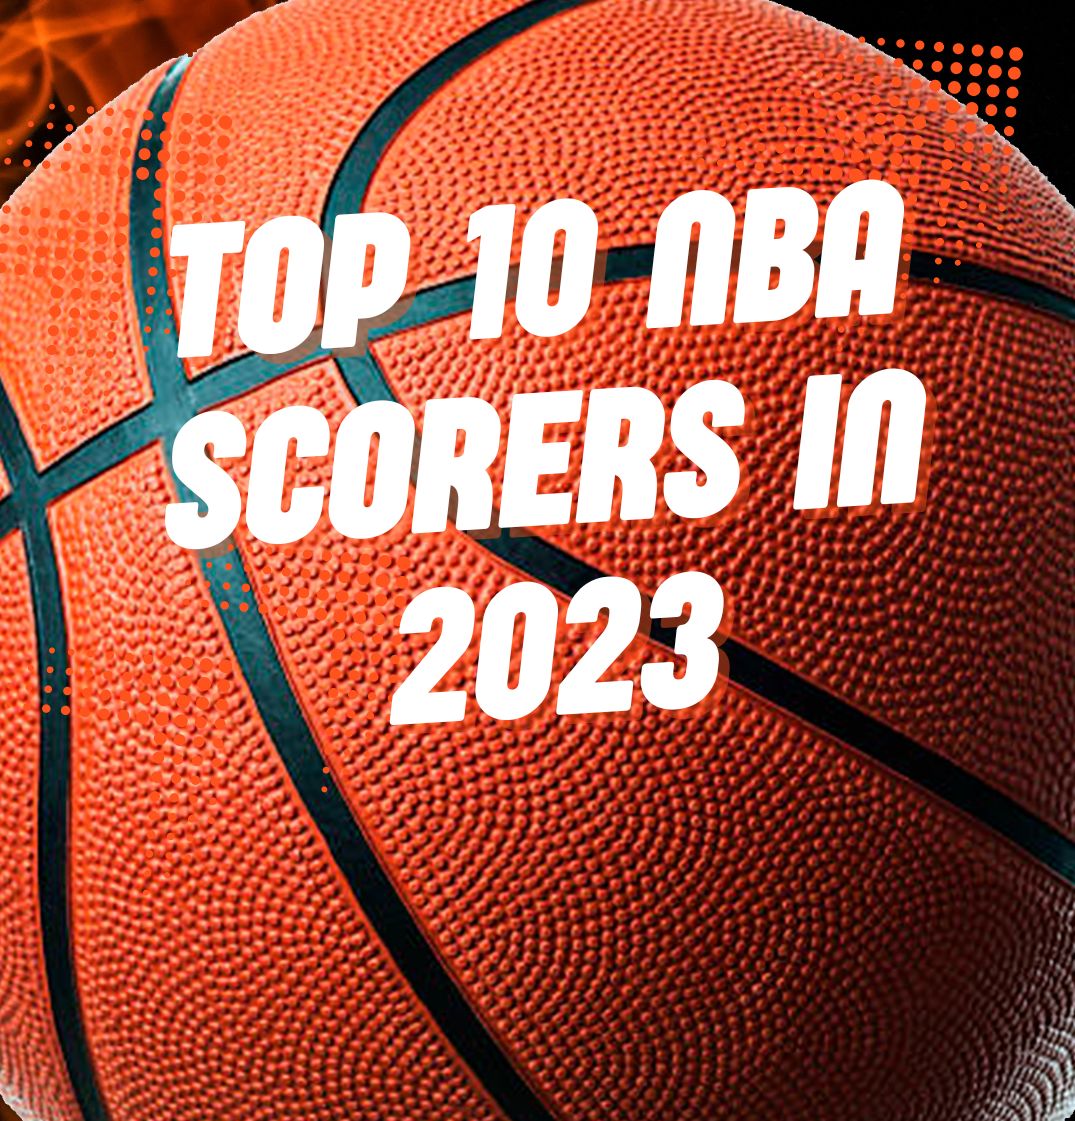 Top 10 Nba Scorers In 2023, Yours Truly, Articles, April 27, 2024